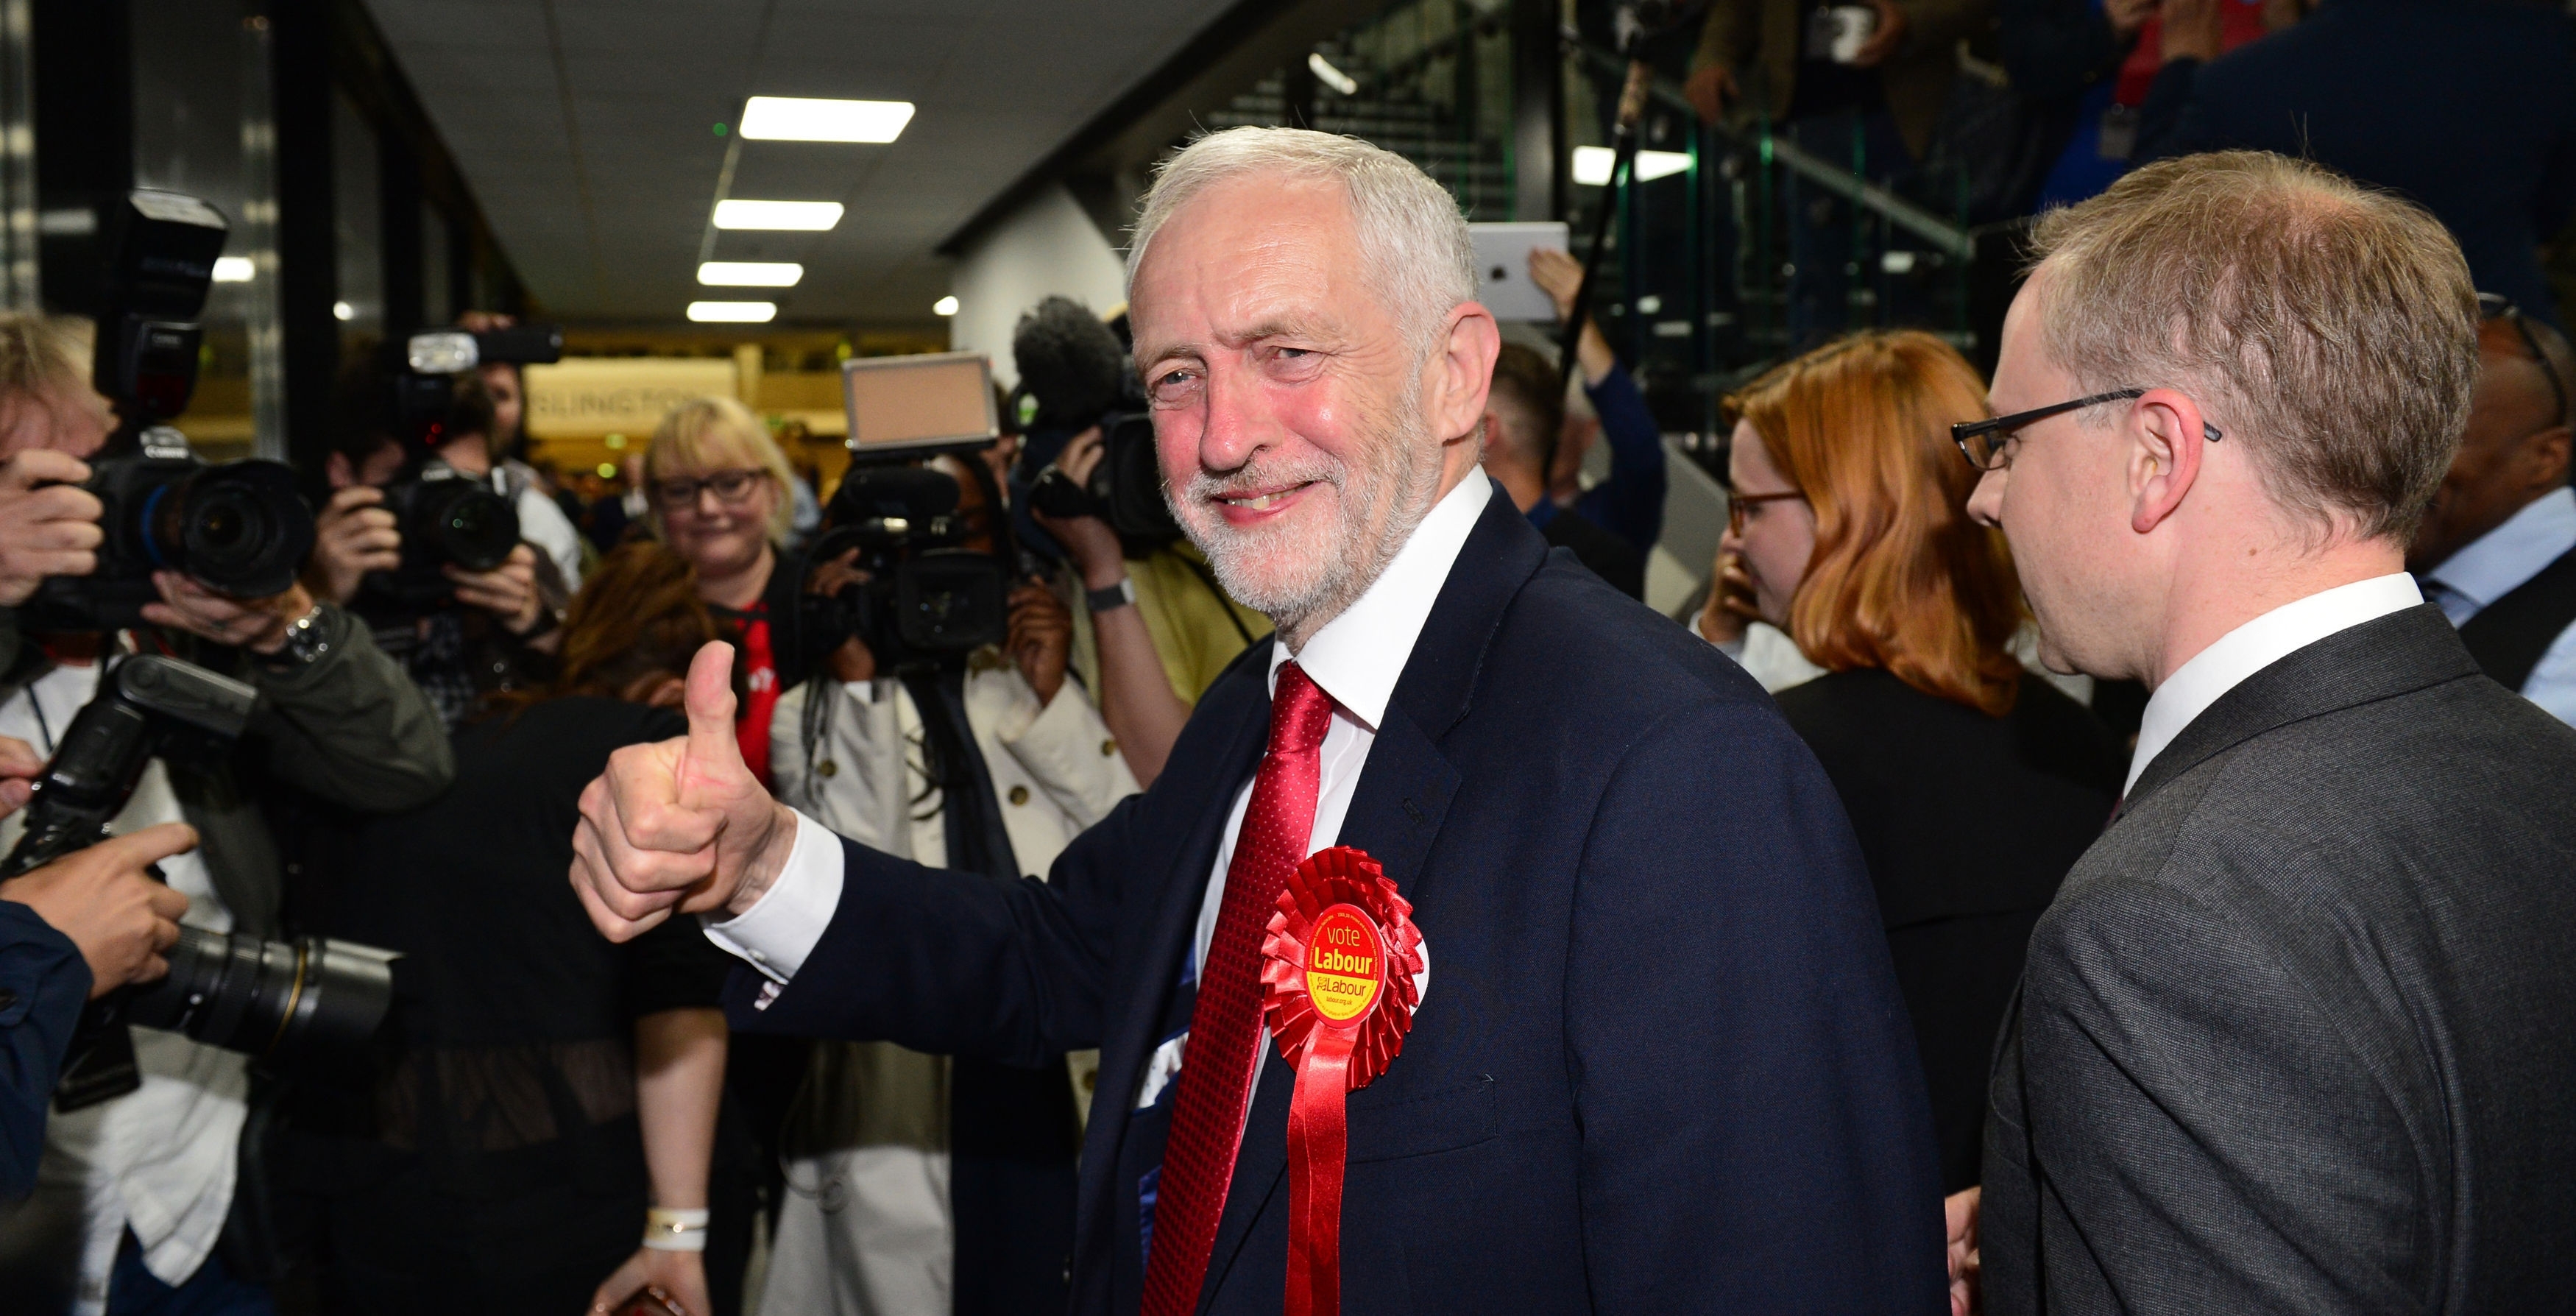 Labour leader Jeremy Corbyn arrives at the Sobell Leisure Centre in Islington, north London, where counting is taking place for the General Election. PRESS ASSOCIATION Photo. Picture date: Friday June 9, 2017. See PA story ELECTION Main. Photo credit should read: Dominic Lipinski/PA Wire